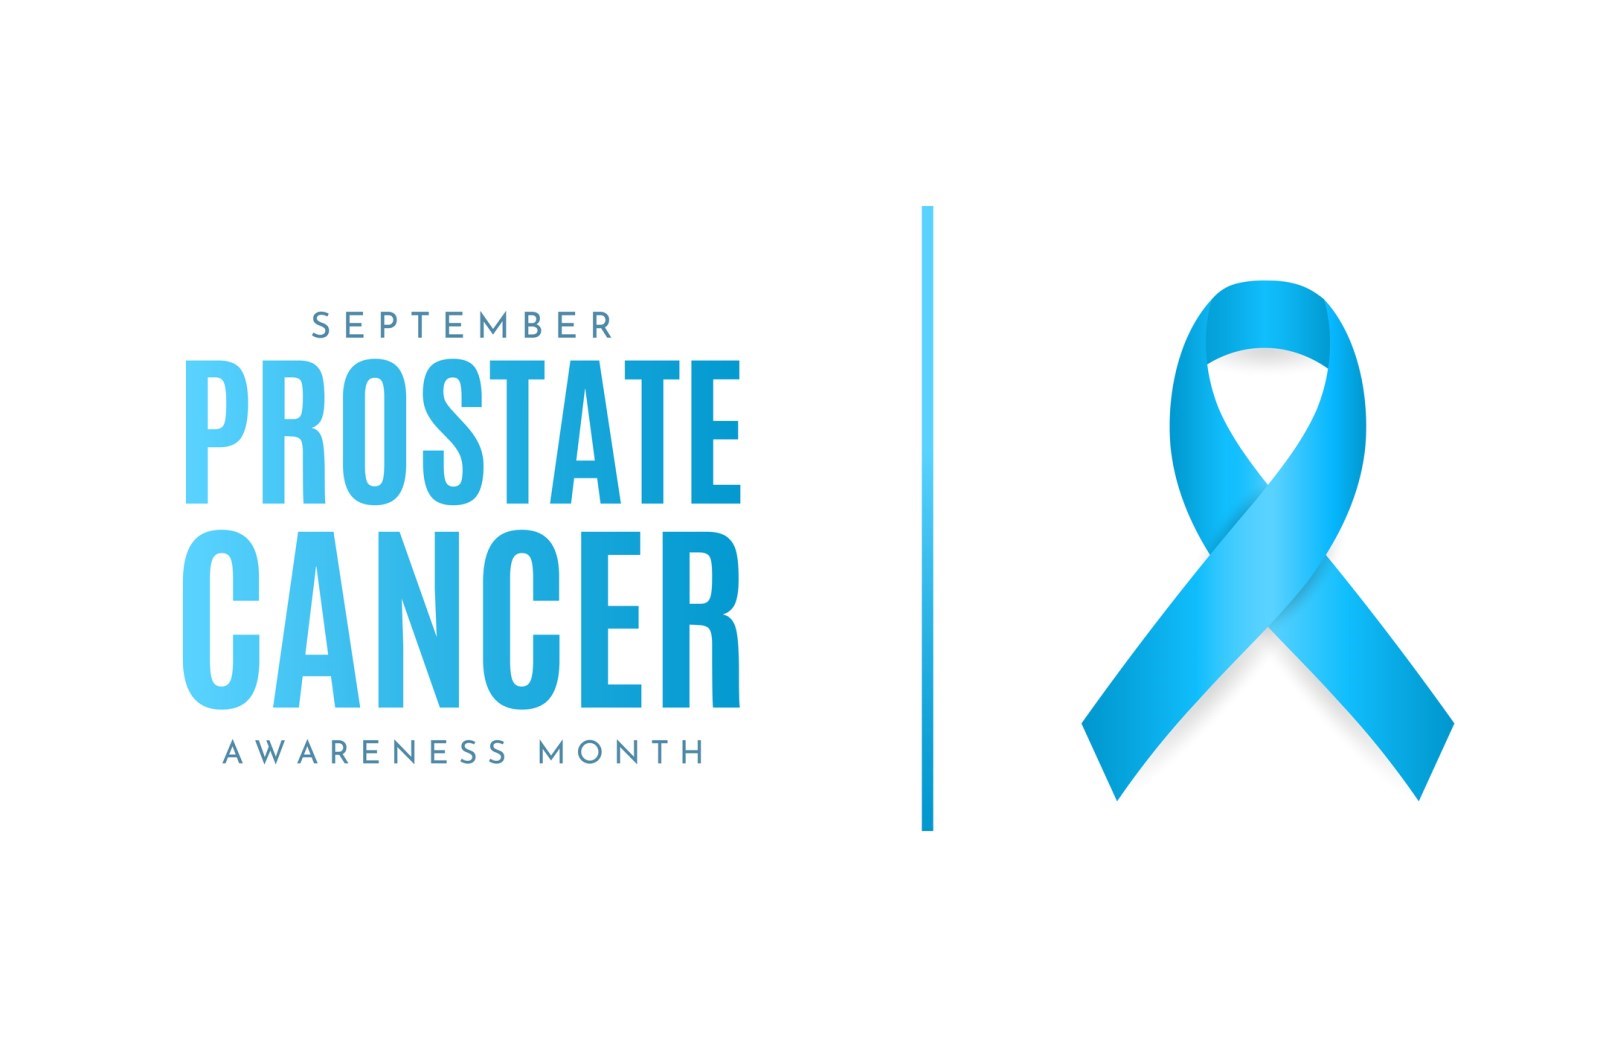 Prostate Cancer Awareness Month